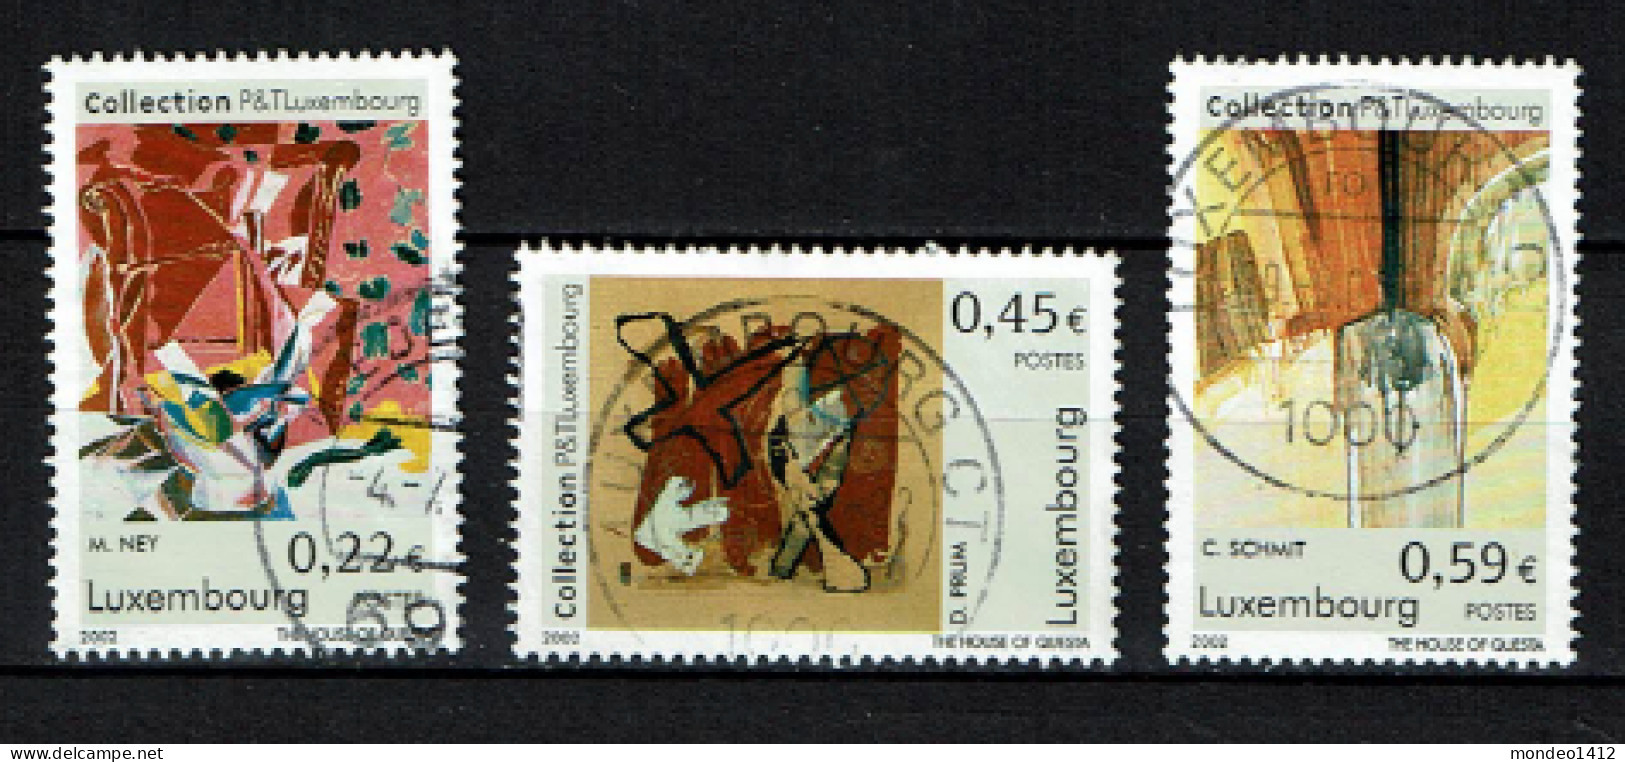 Luxembourg 2002 - YT 1517/1519 - Modern Art Collection - Moritz Ney, Dany Prüm, Christiane Schmit - Used Stamps